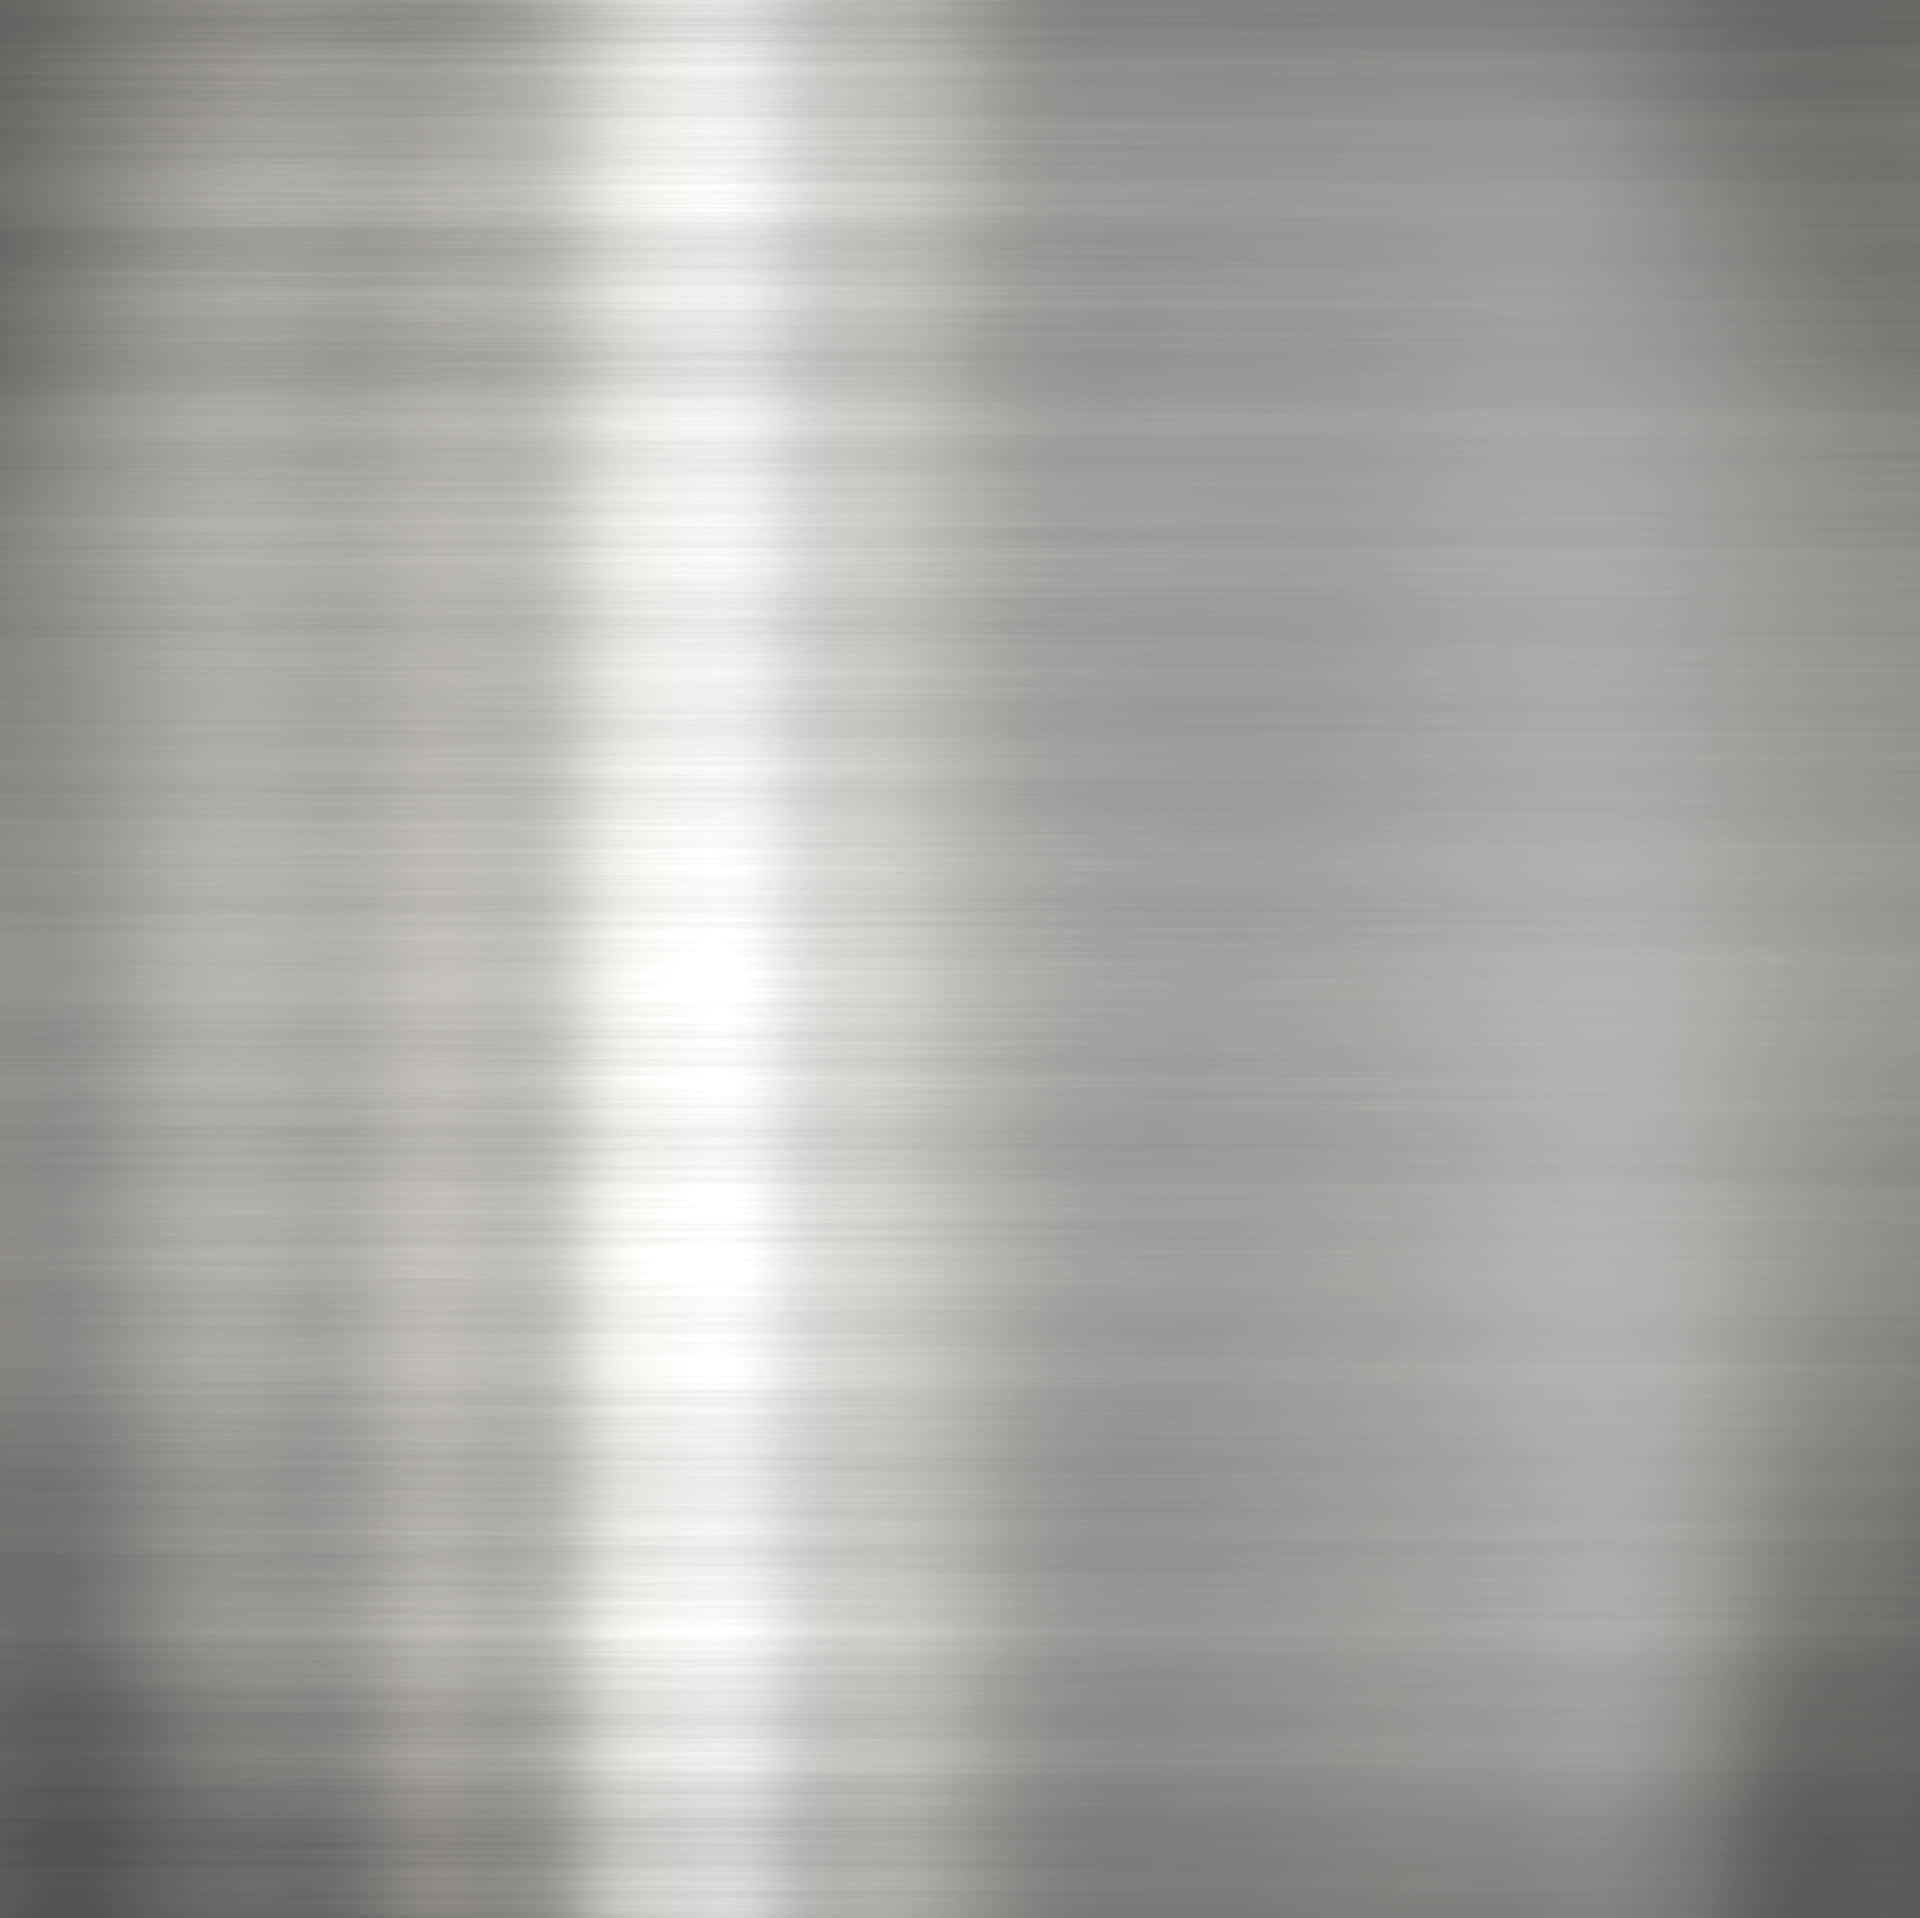 A Silver Metal Plate Background With A Light Reflection